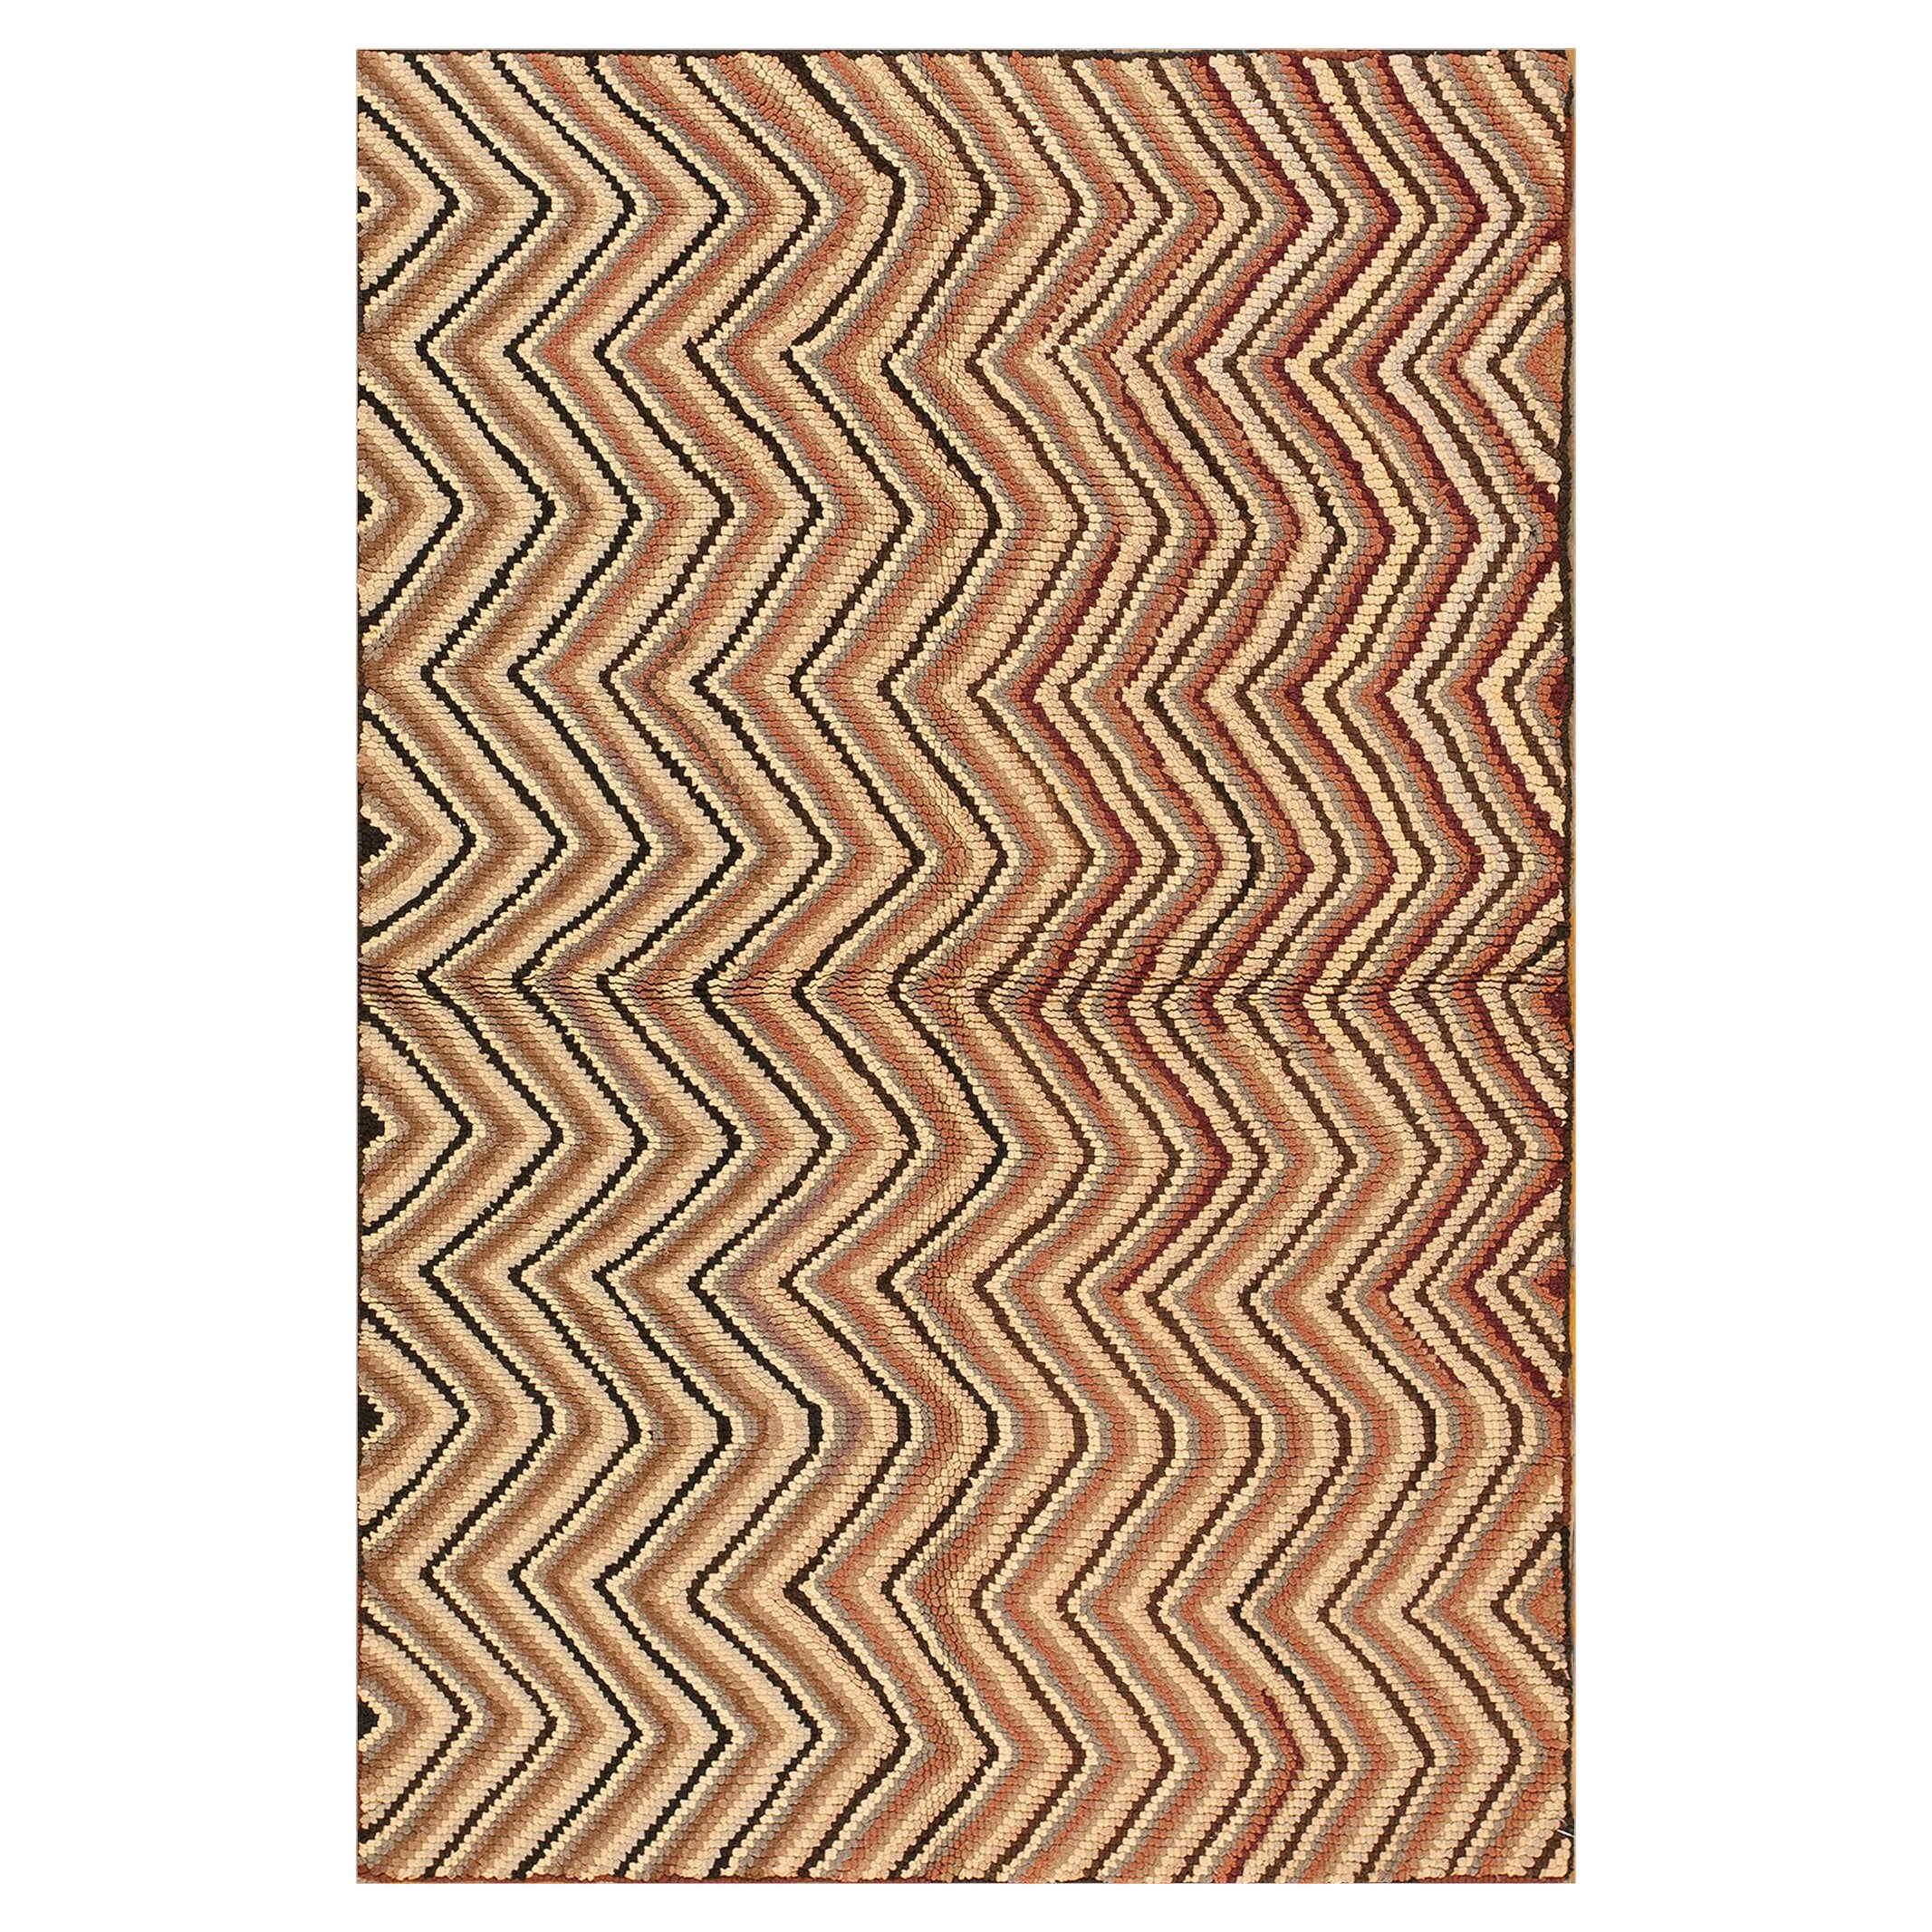 Mid 20th Century American Hooked Rug ( 3'9" x 6'3" - 114 x 191 ) For Sale